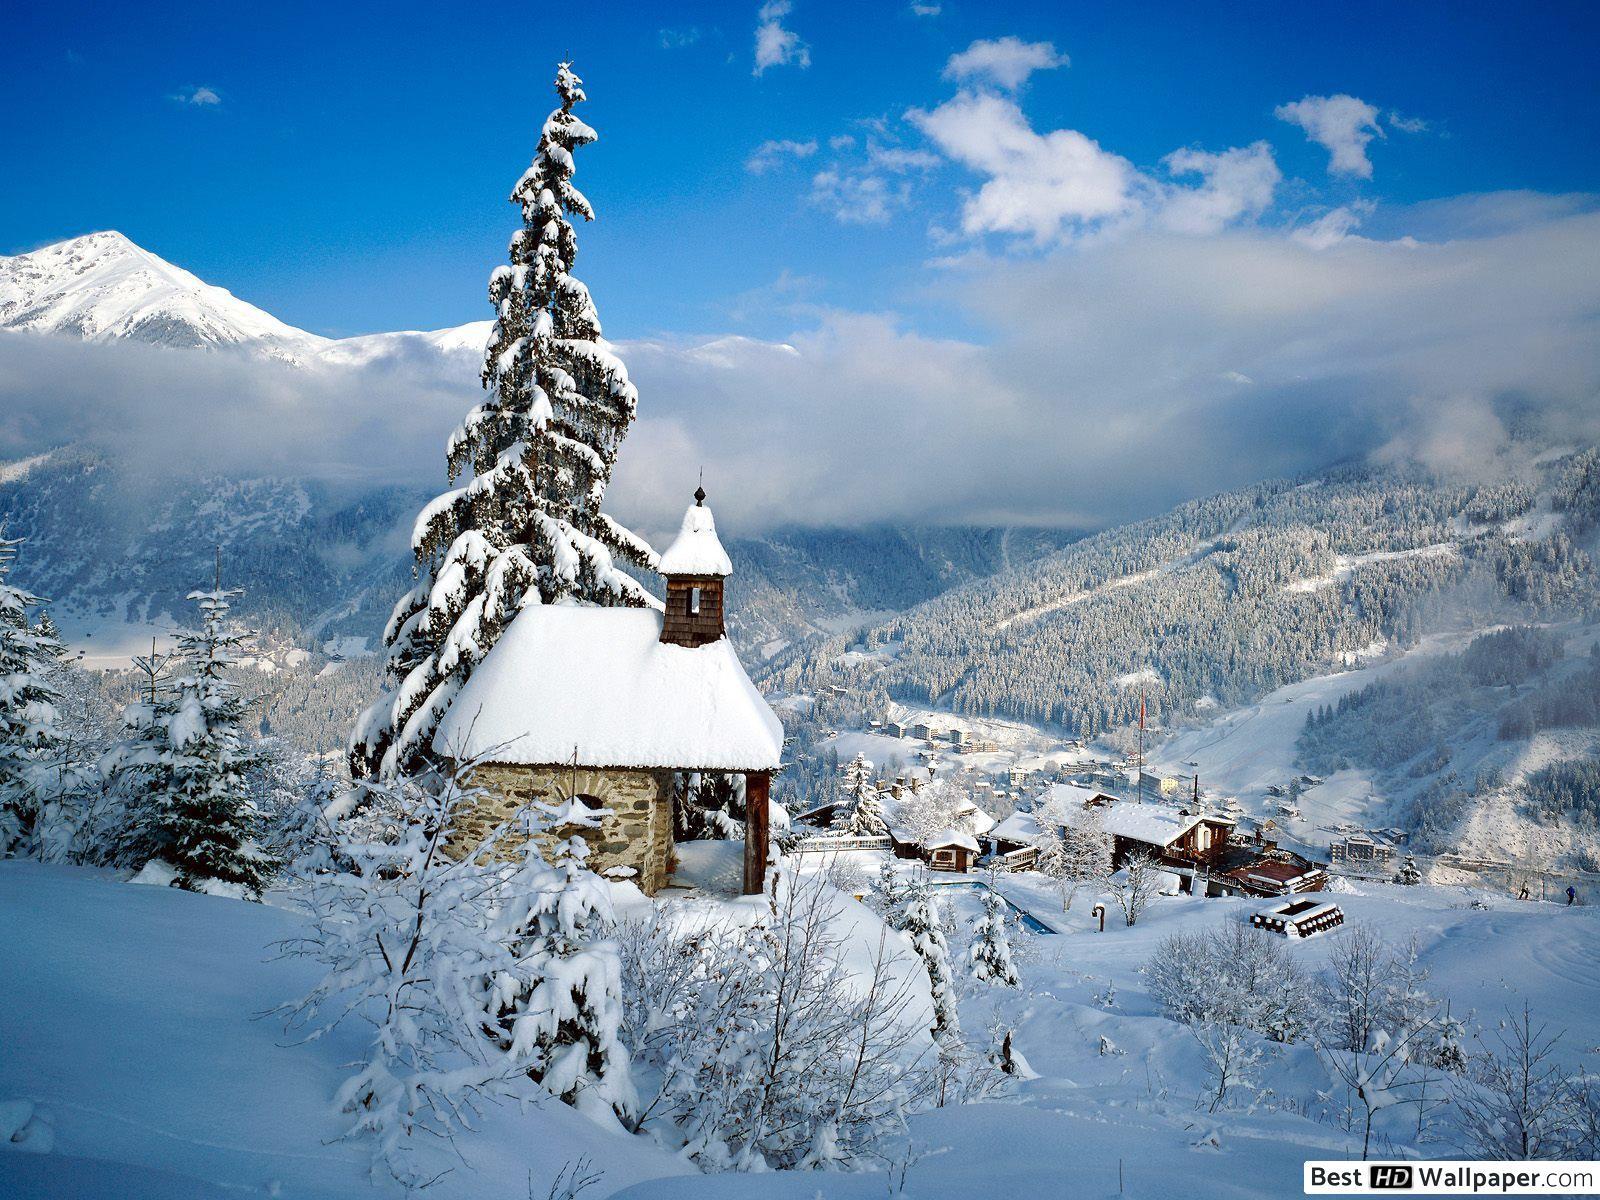 Snowy village in the mountains HD wallpaper download